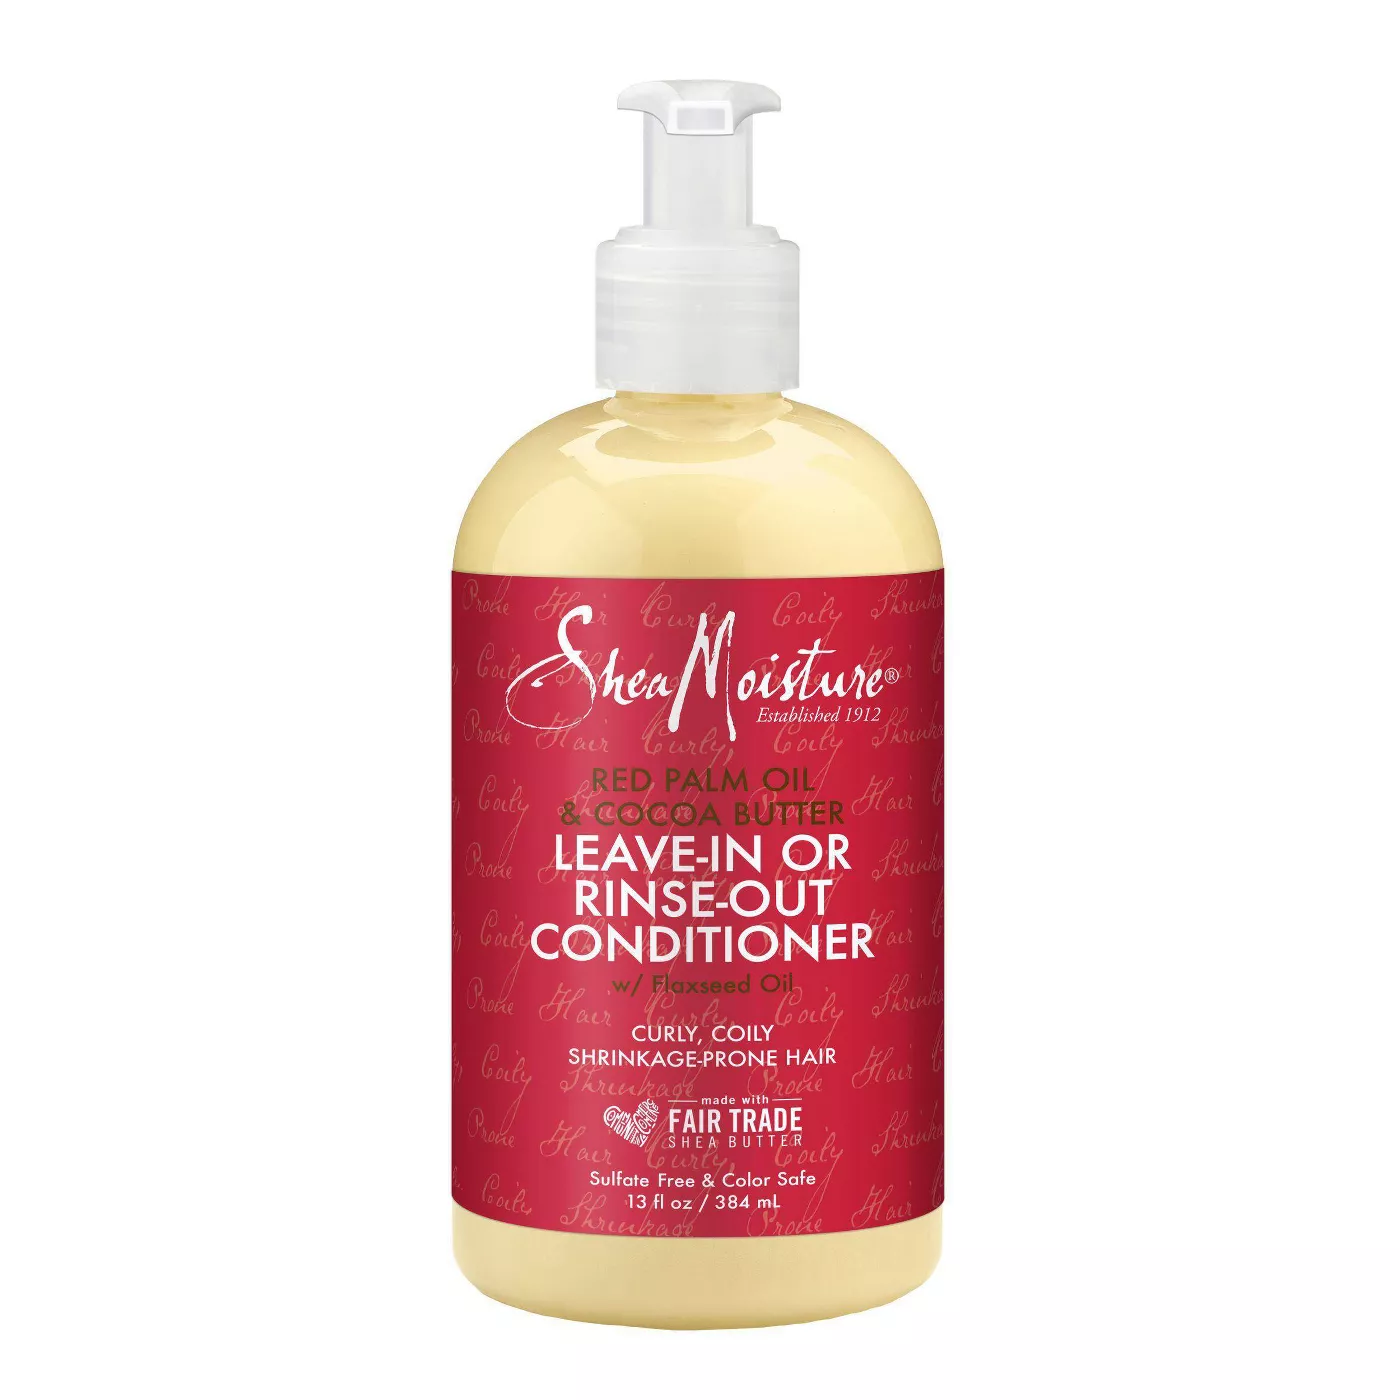 SheaMoisture Red Palm Oil & Cocoa Butter Rinse Out or Leave In Conditioner - 13 fl oz - image 1 of 6